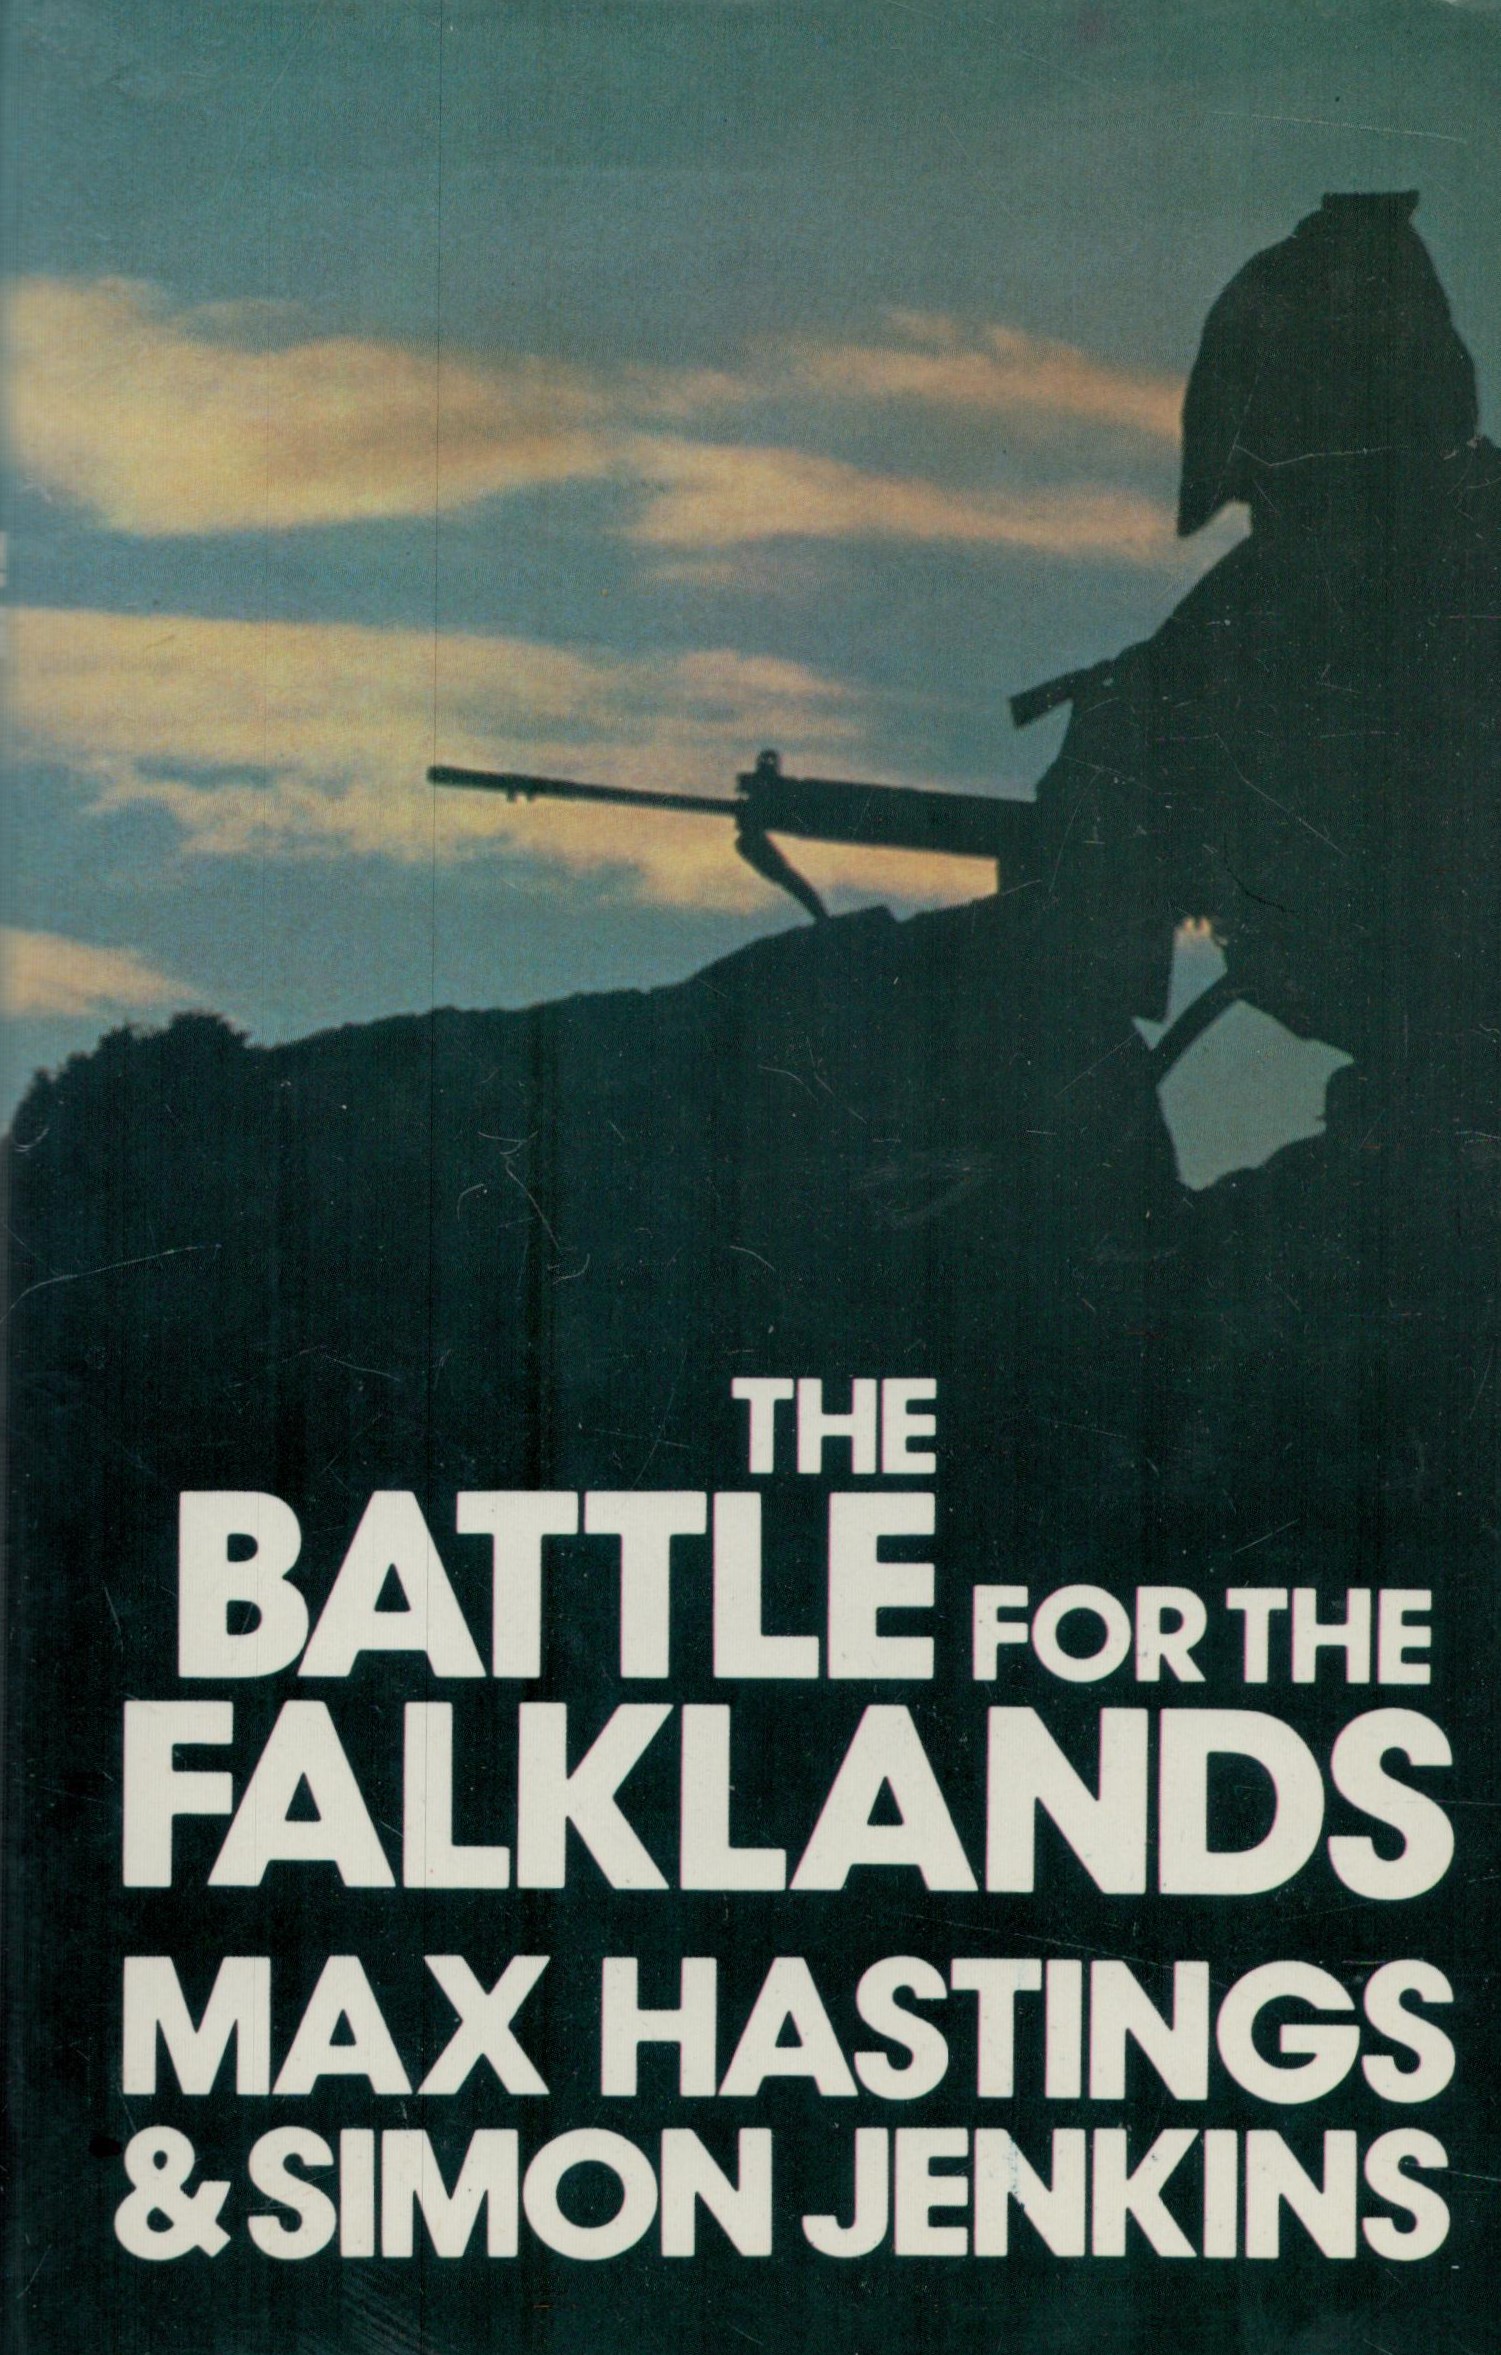 The Battle for the Falklands by Max Hastings & Simon Jenkins 1983 Book Club Edition Hardback Book